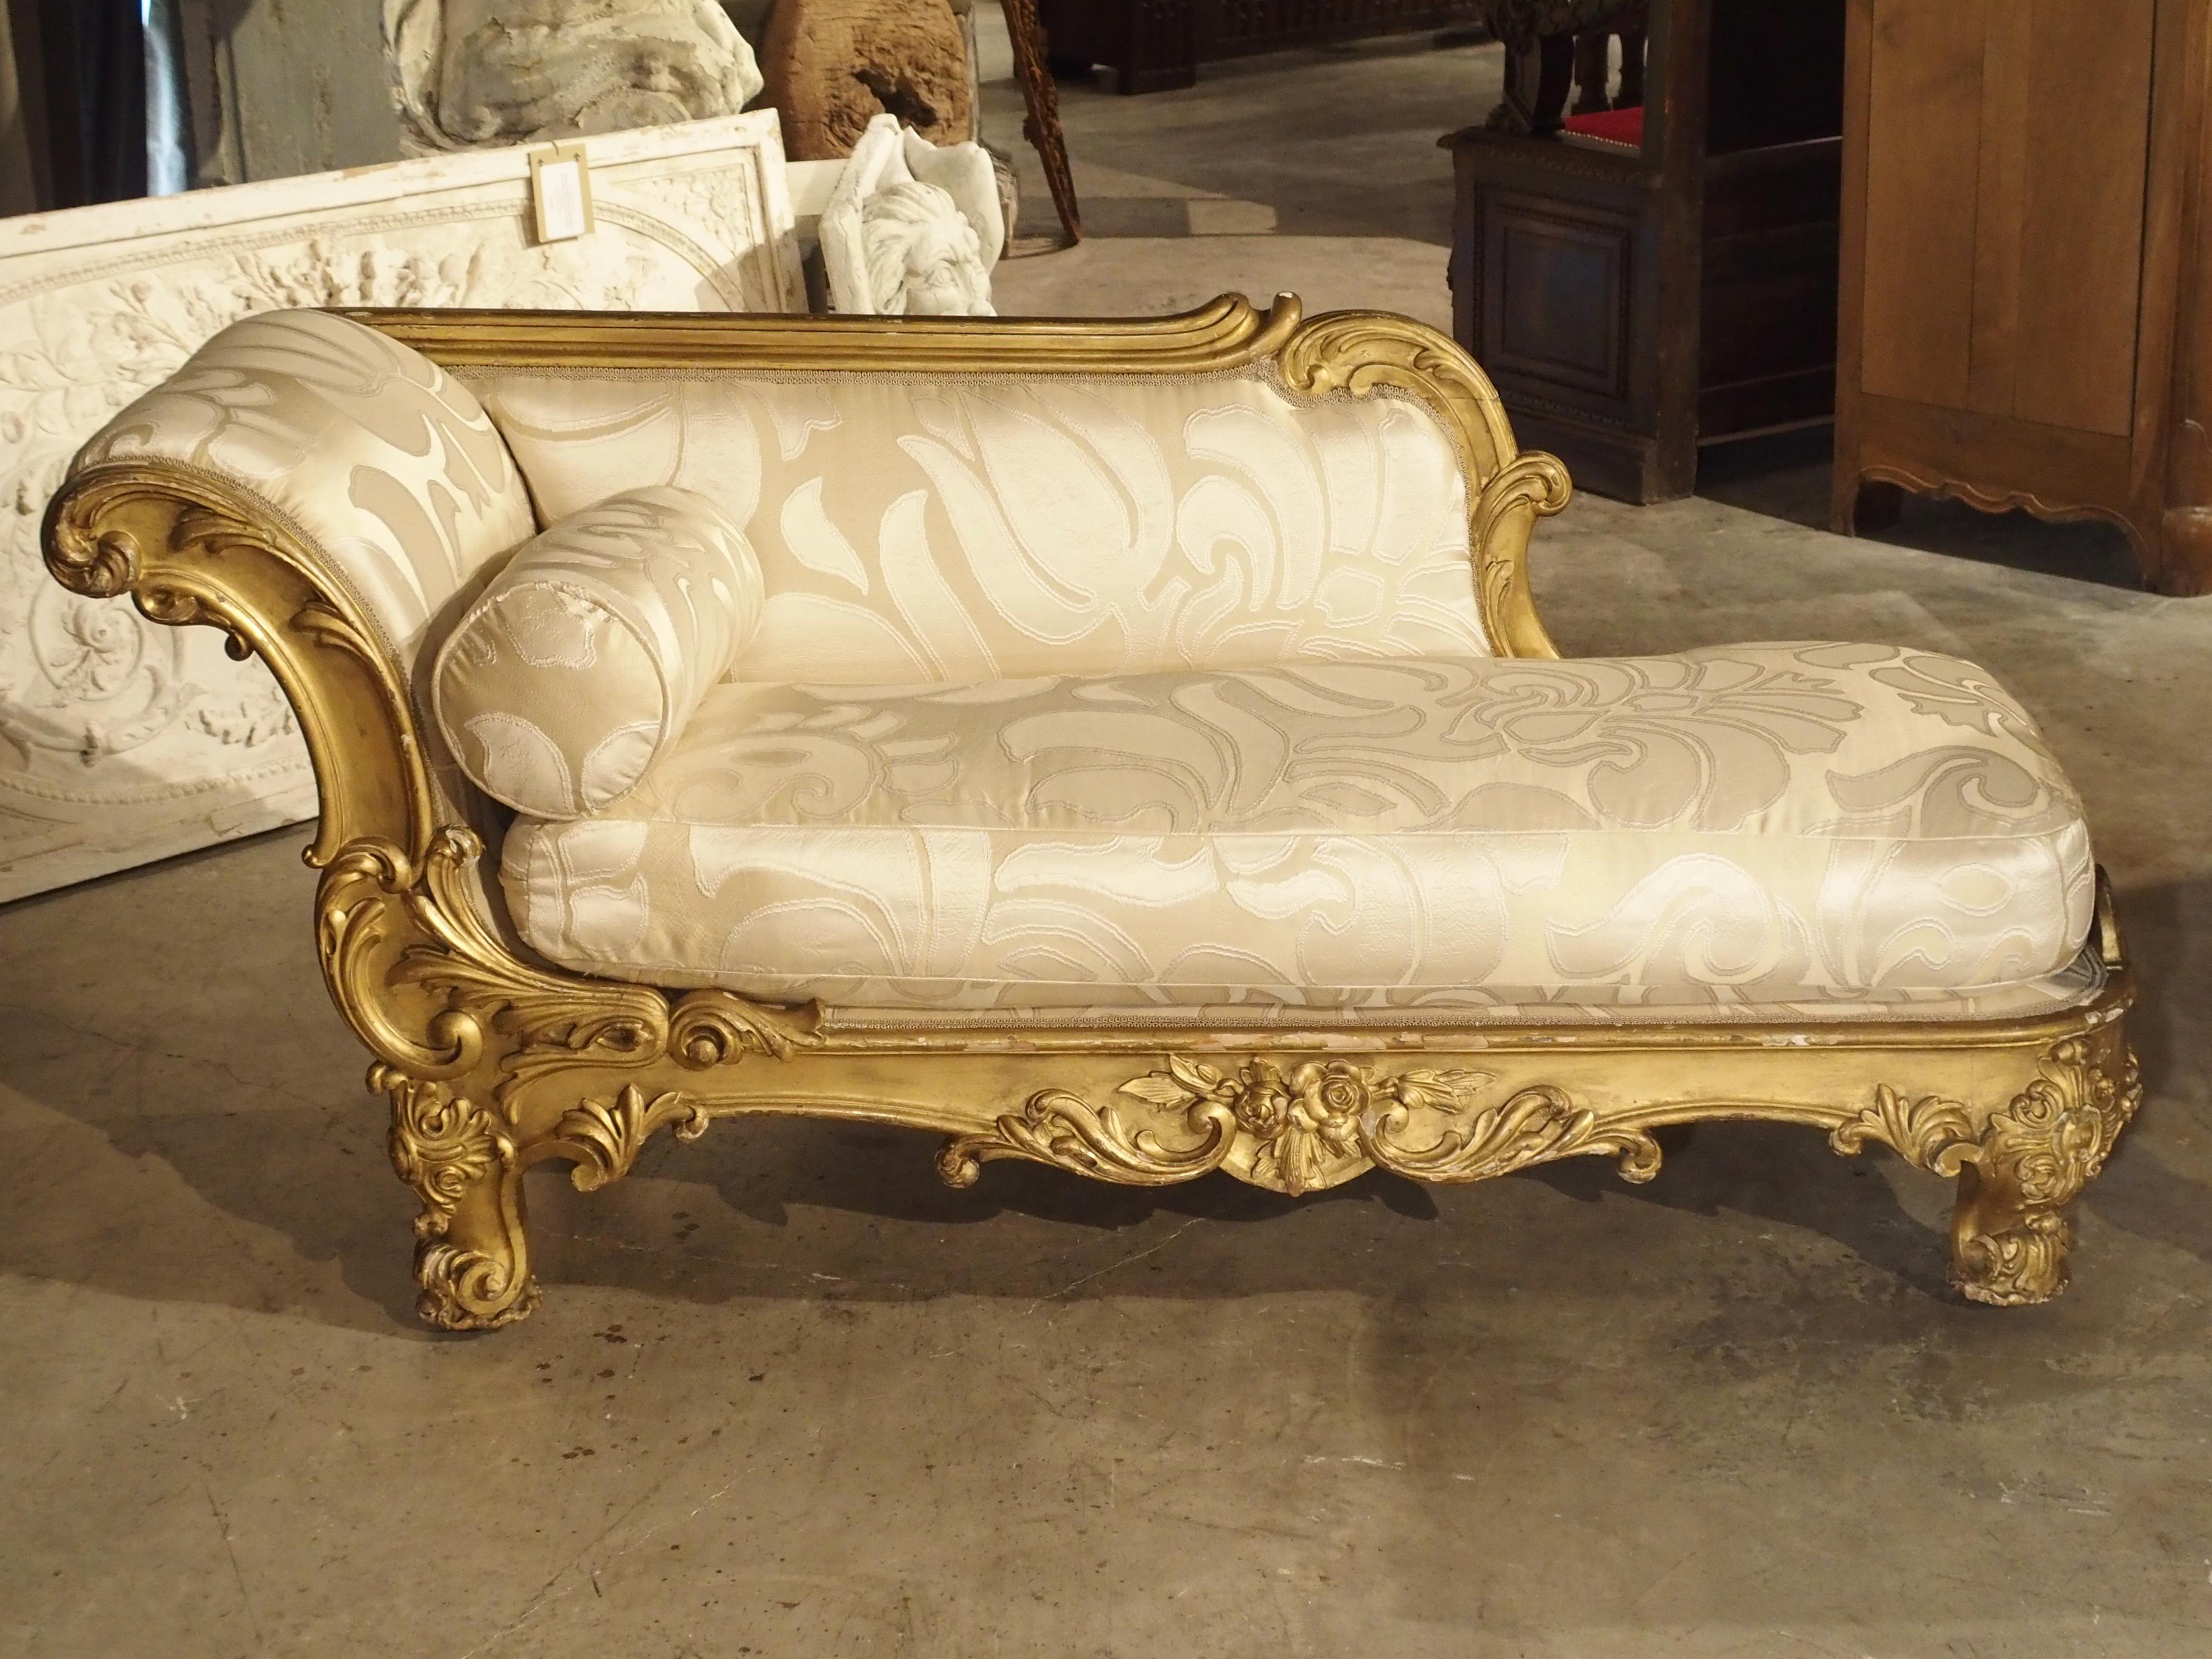 Louis XV 19th Century French Giltwood Chaise Lounge Upholstered in Bergamo Silk